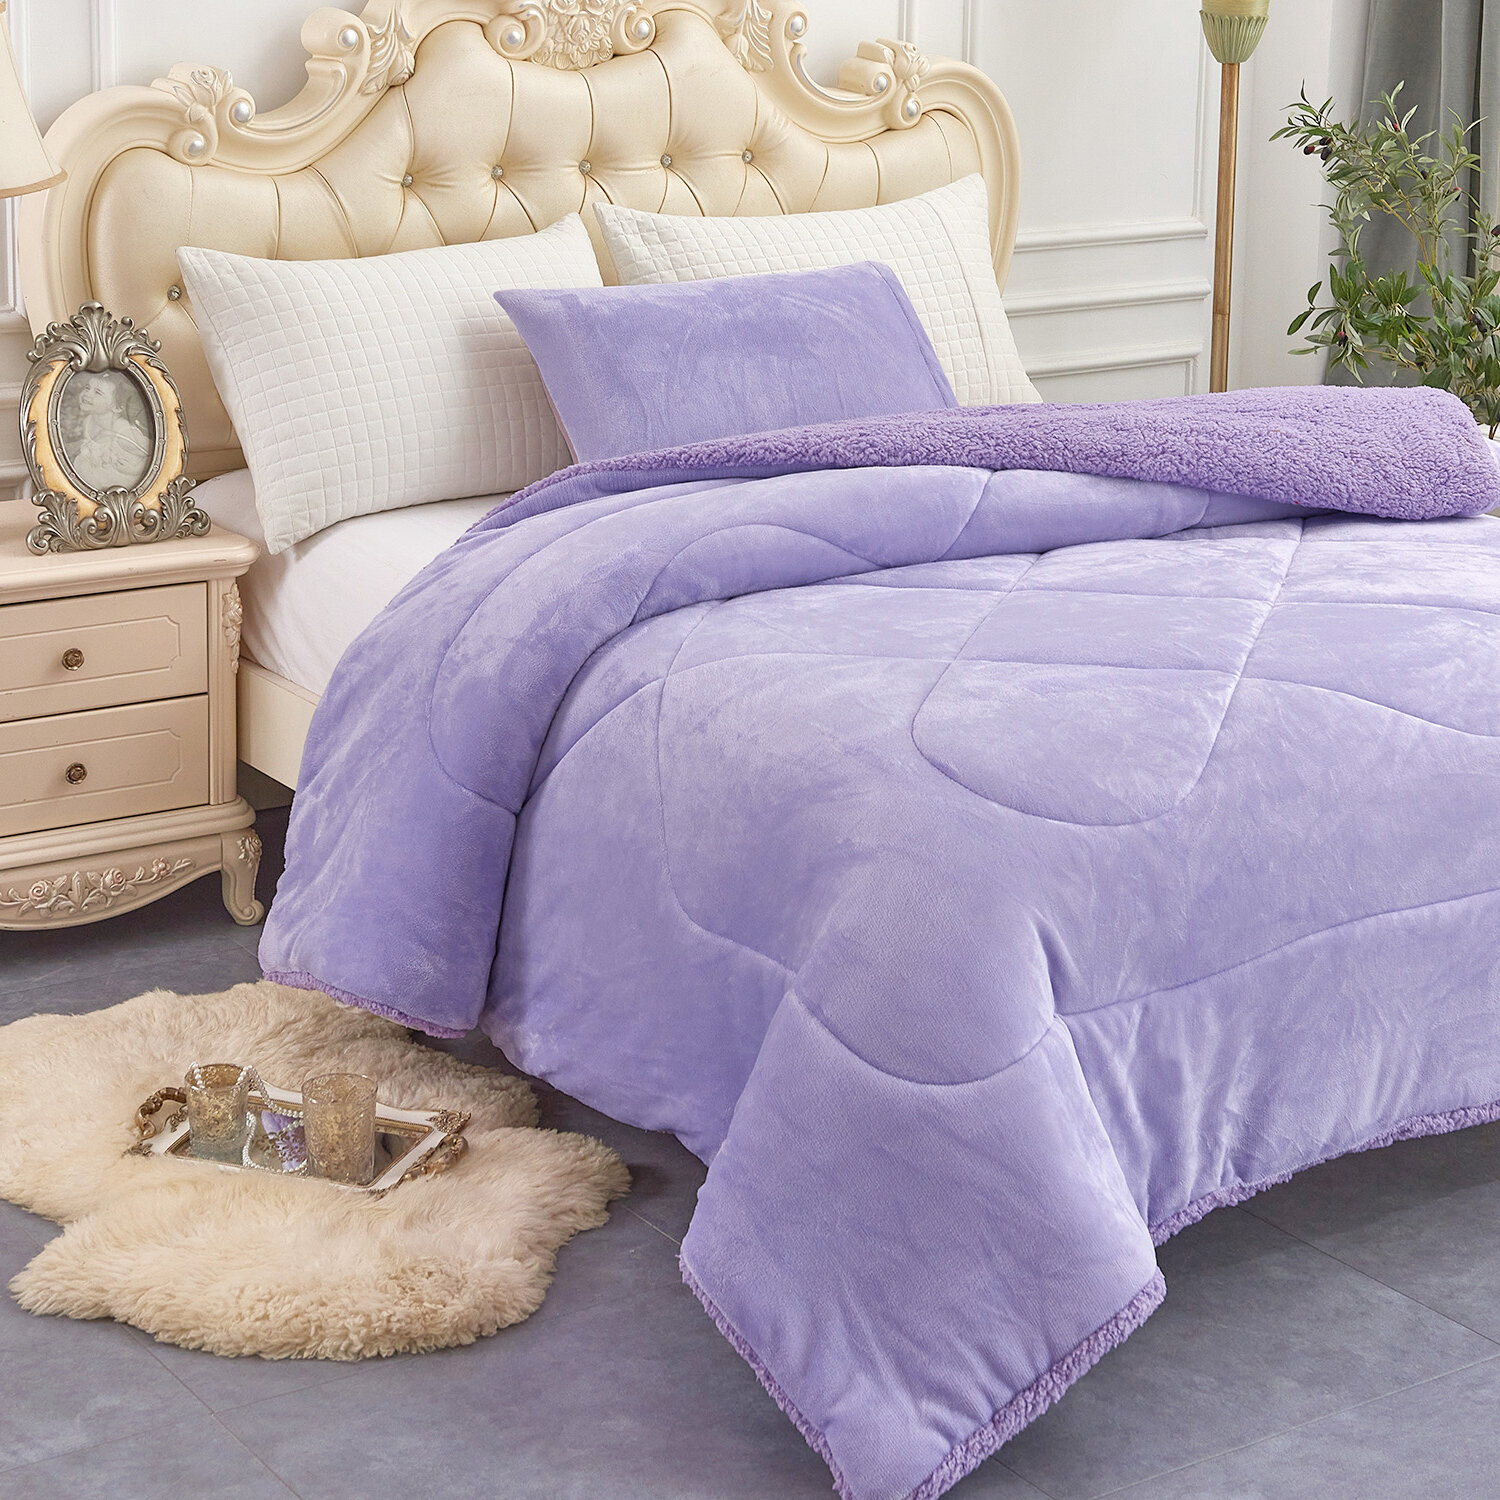 Twin Size Sherpa Fleece Blanket with Pillow Shams (Set of 2) Everly Quinn Color: Purple